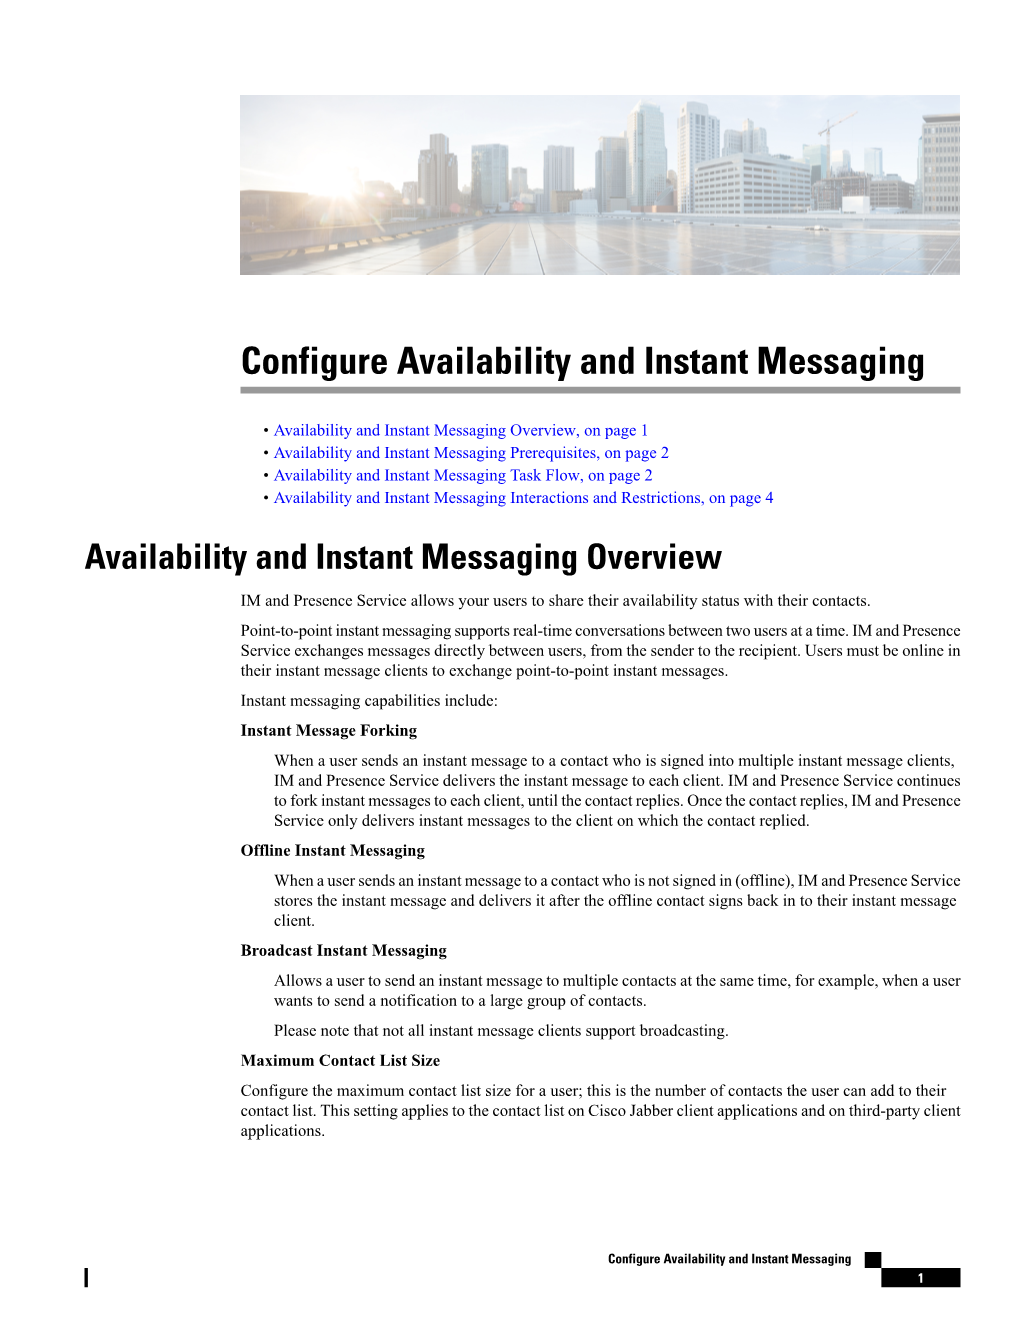 Configure Availability and Instant Messaging